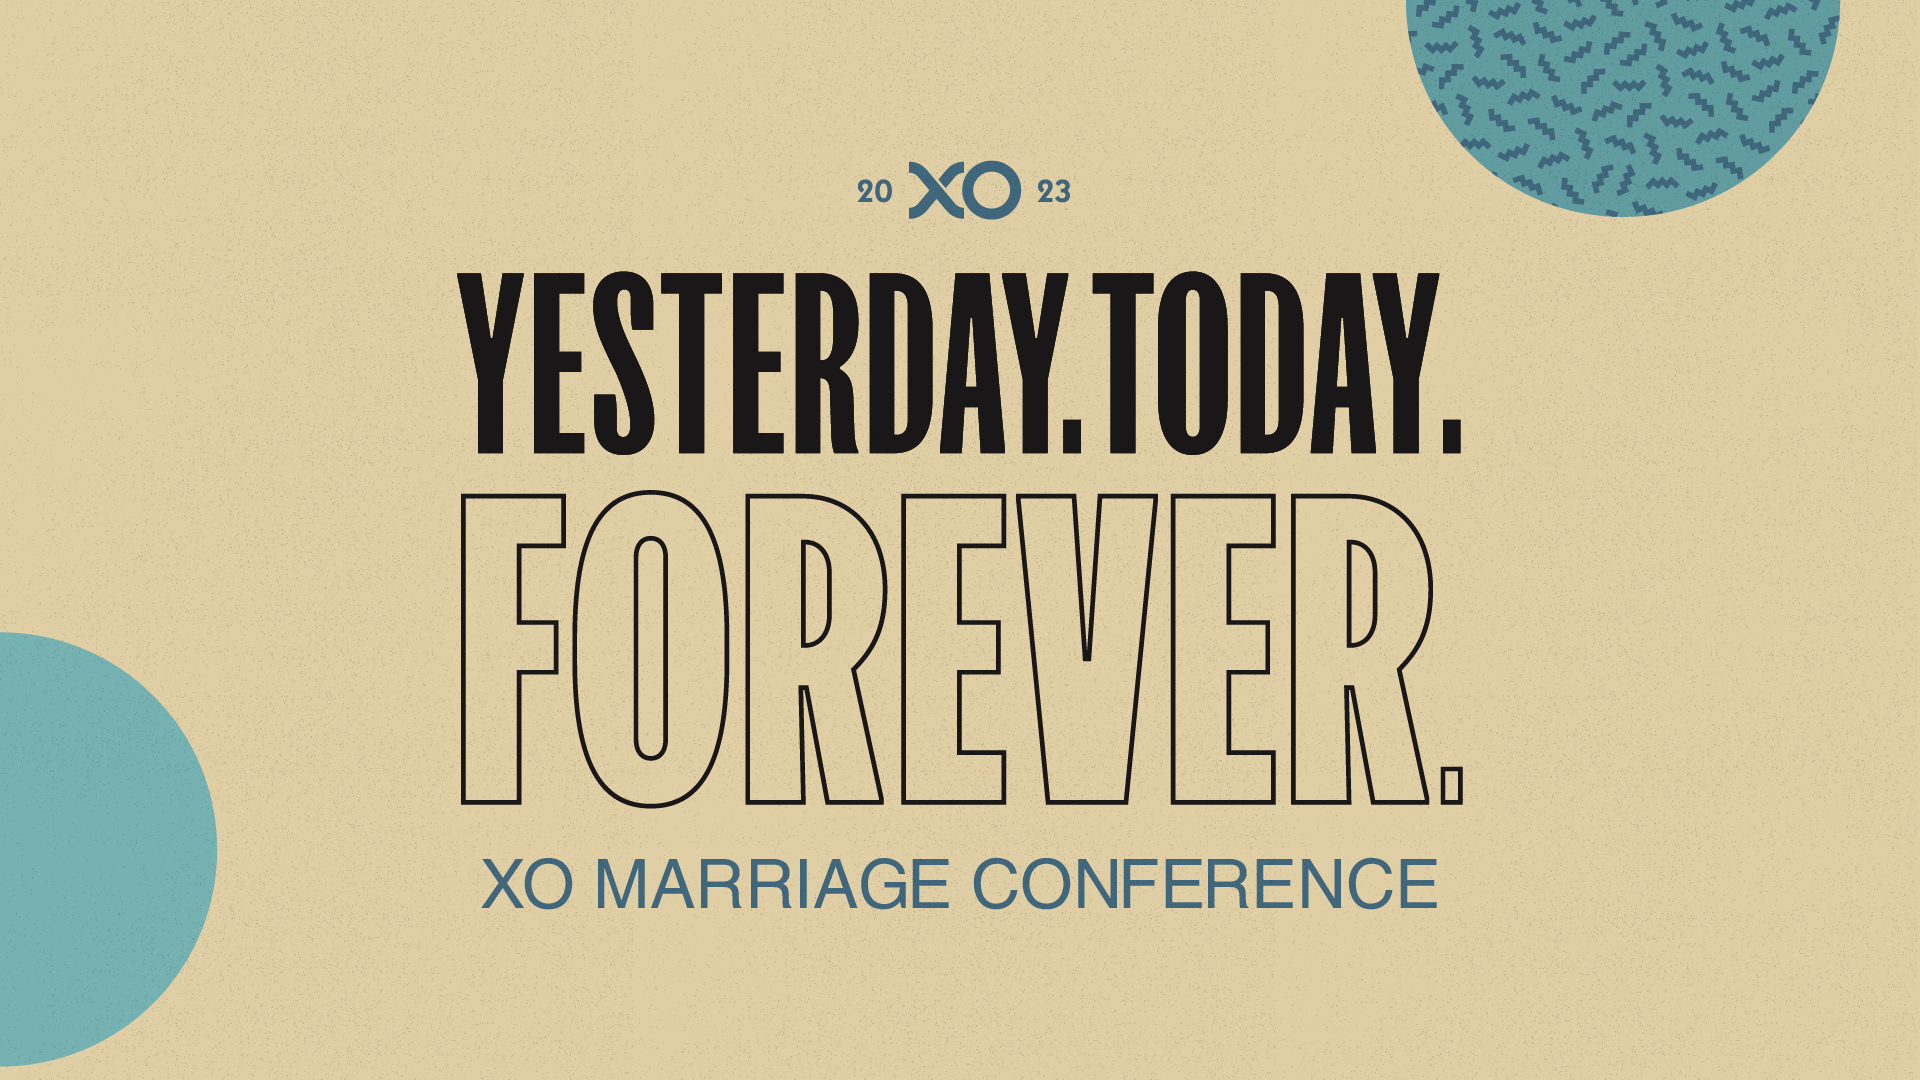 XO Marriage Conference - Polo Campus